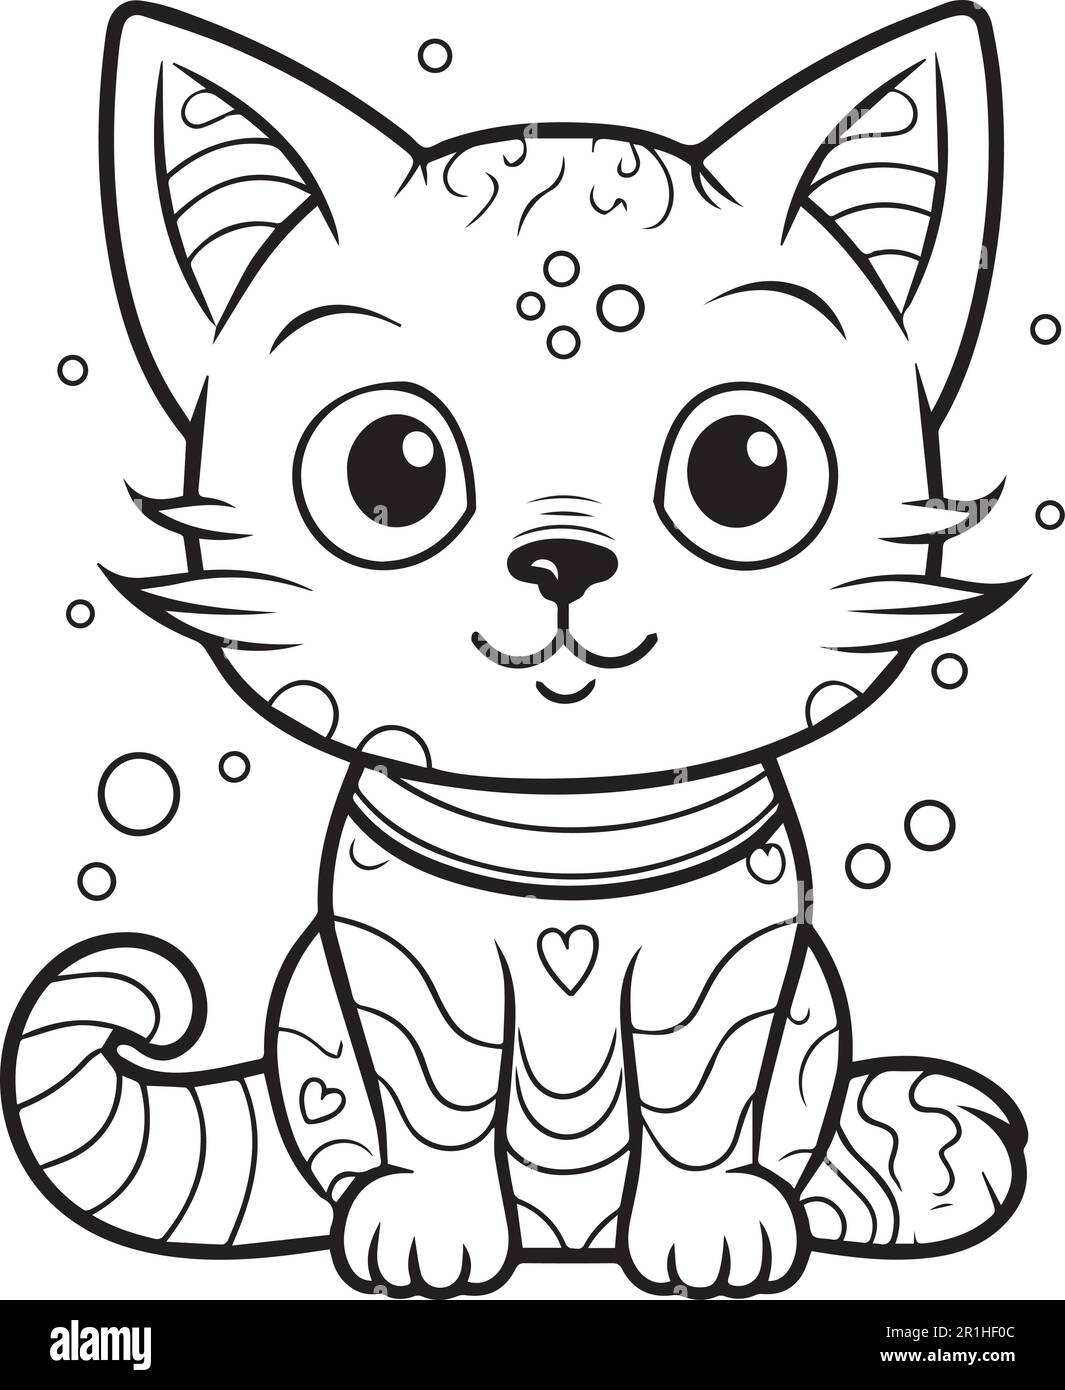 A cute line art cat coloring book for kids. Coloring page for doodlers. Stock Vector